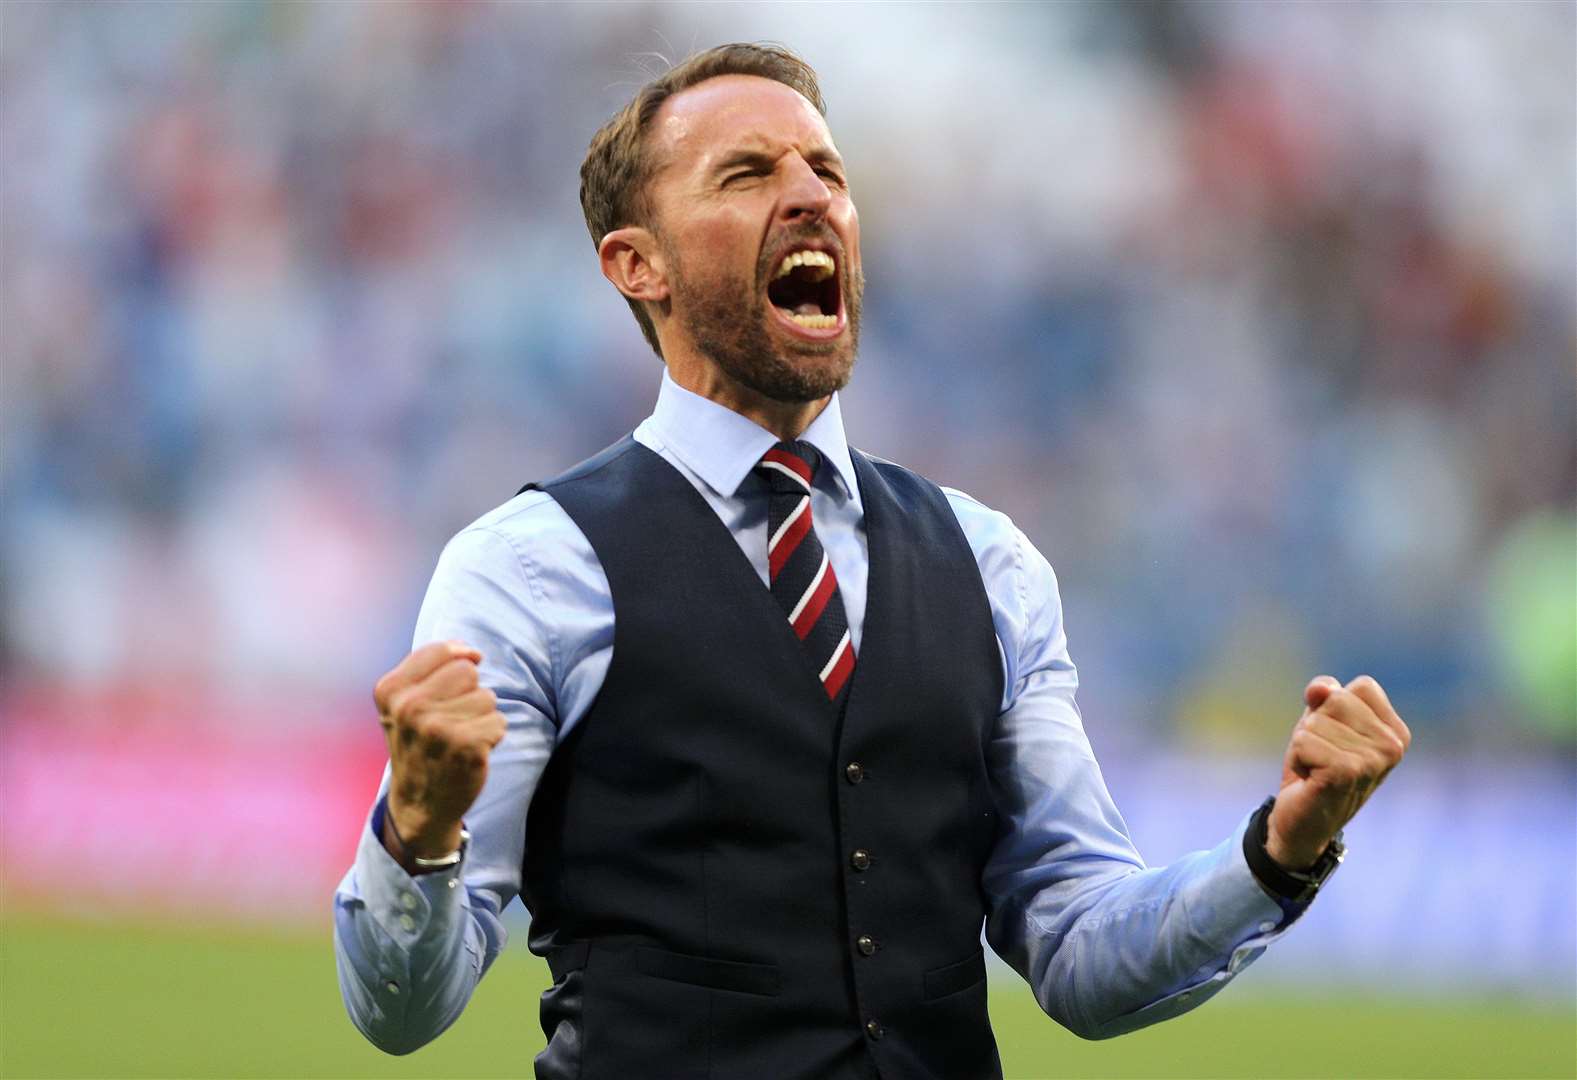 England manager Gareth Southgate in his iconic waistcoat. Picture: PA Wire